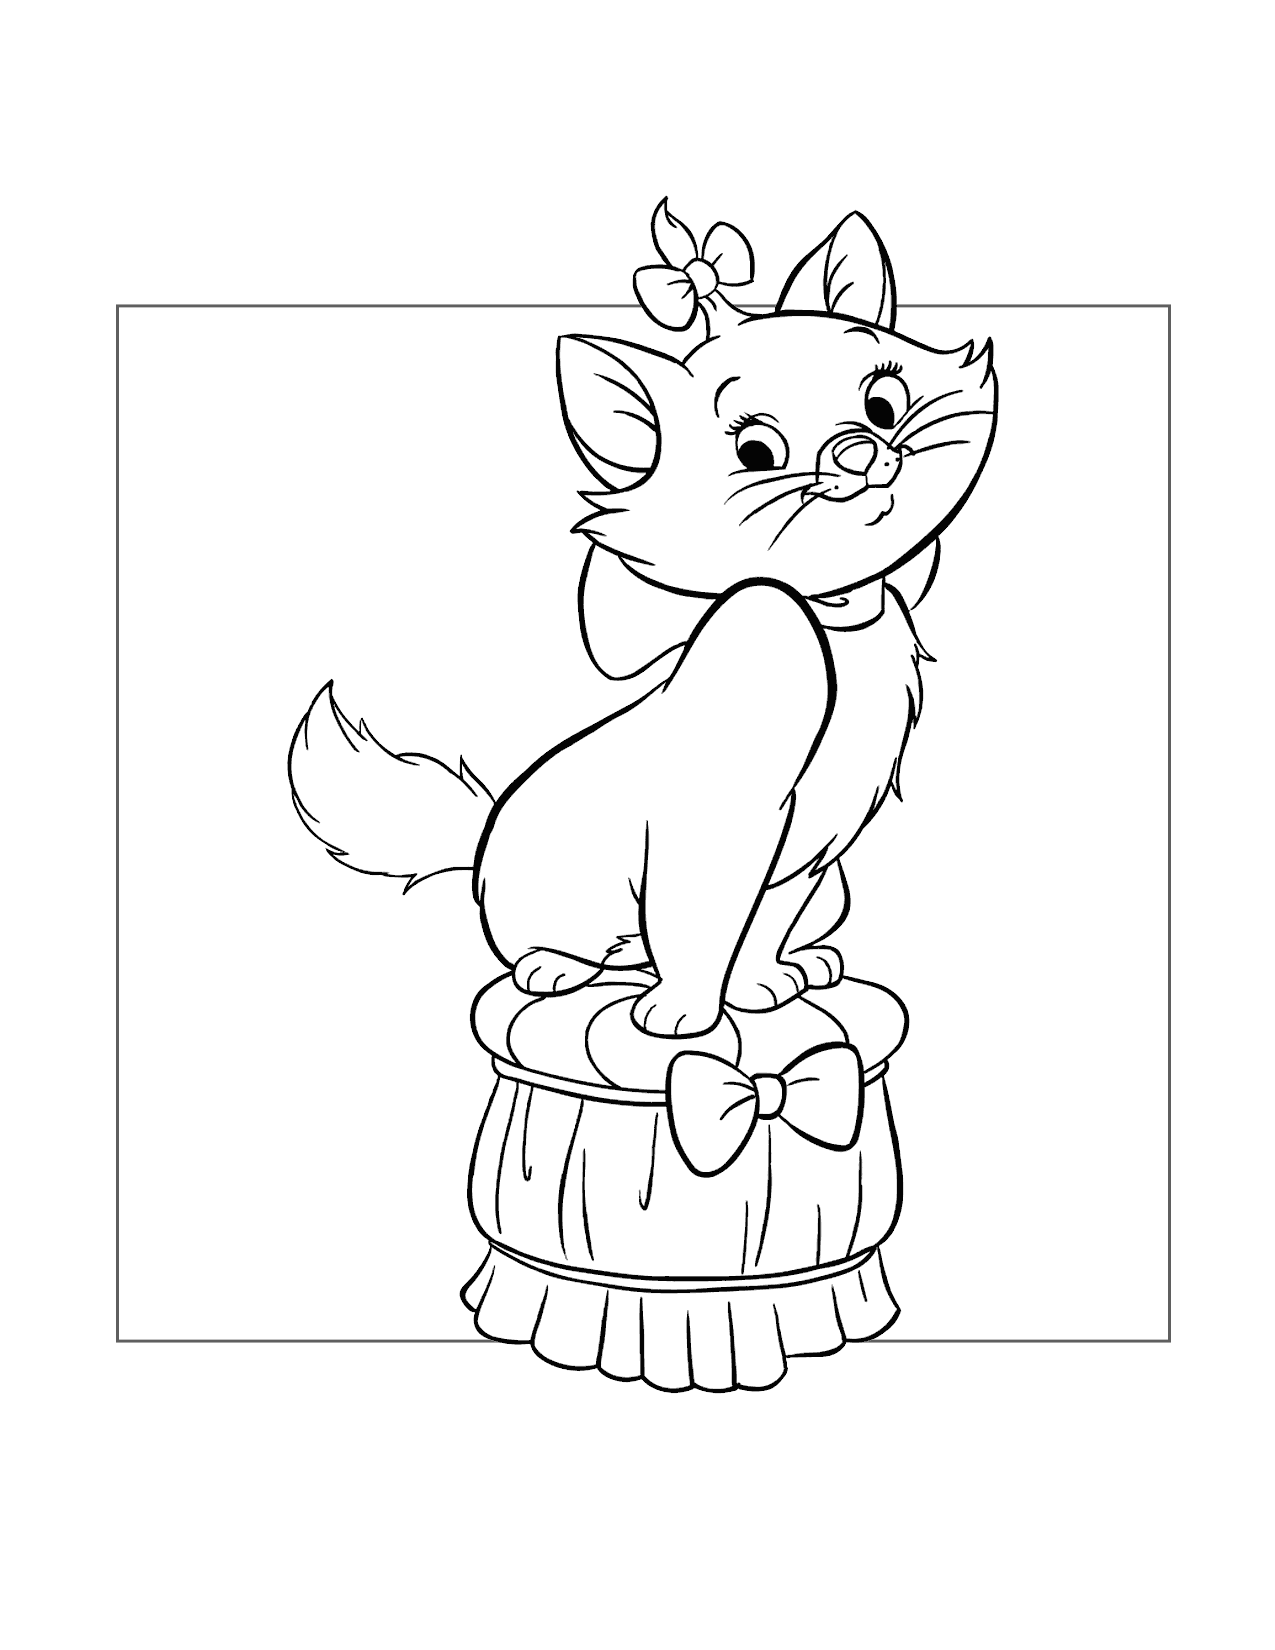 Cute Marie Aristocats Coloring Page